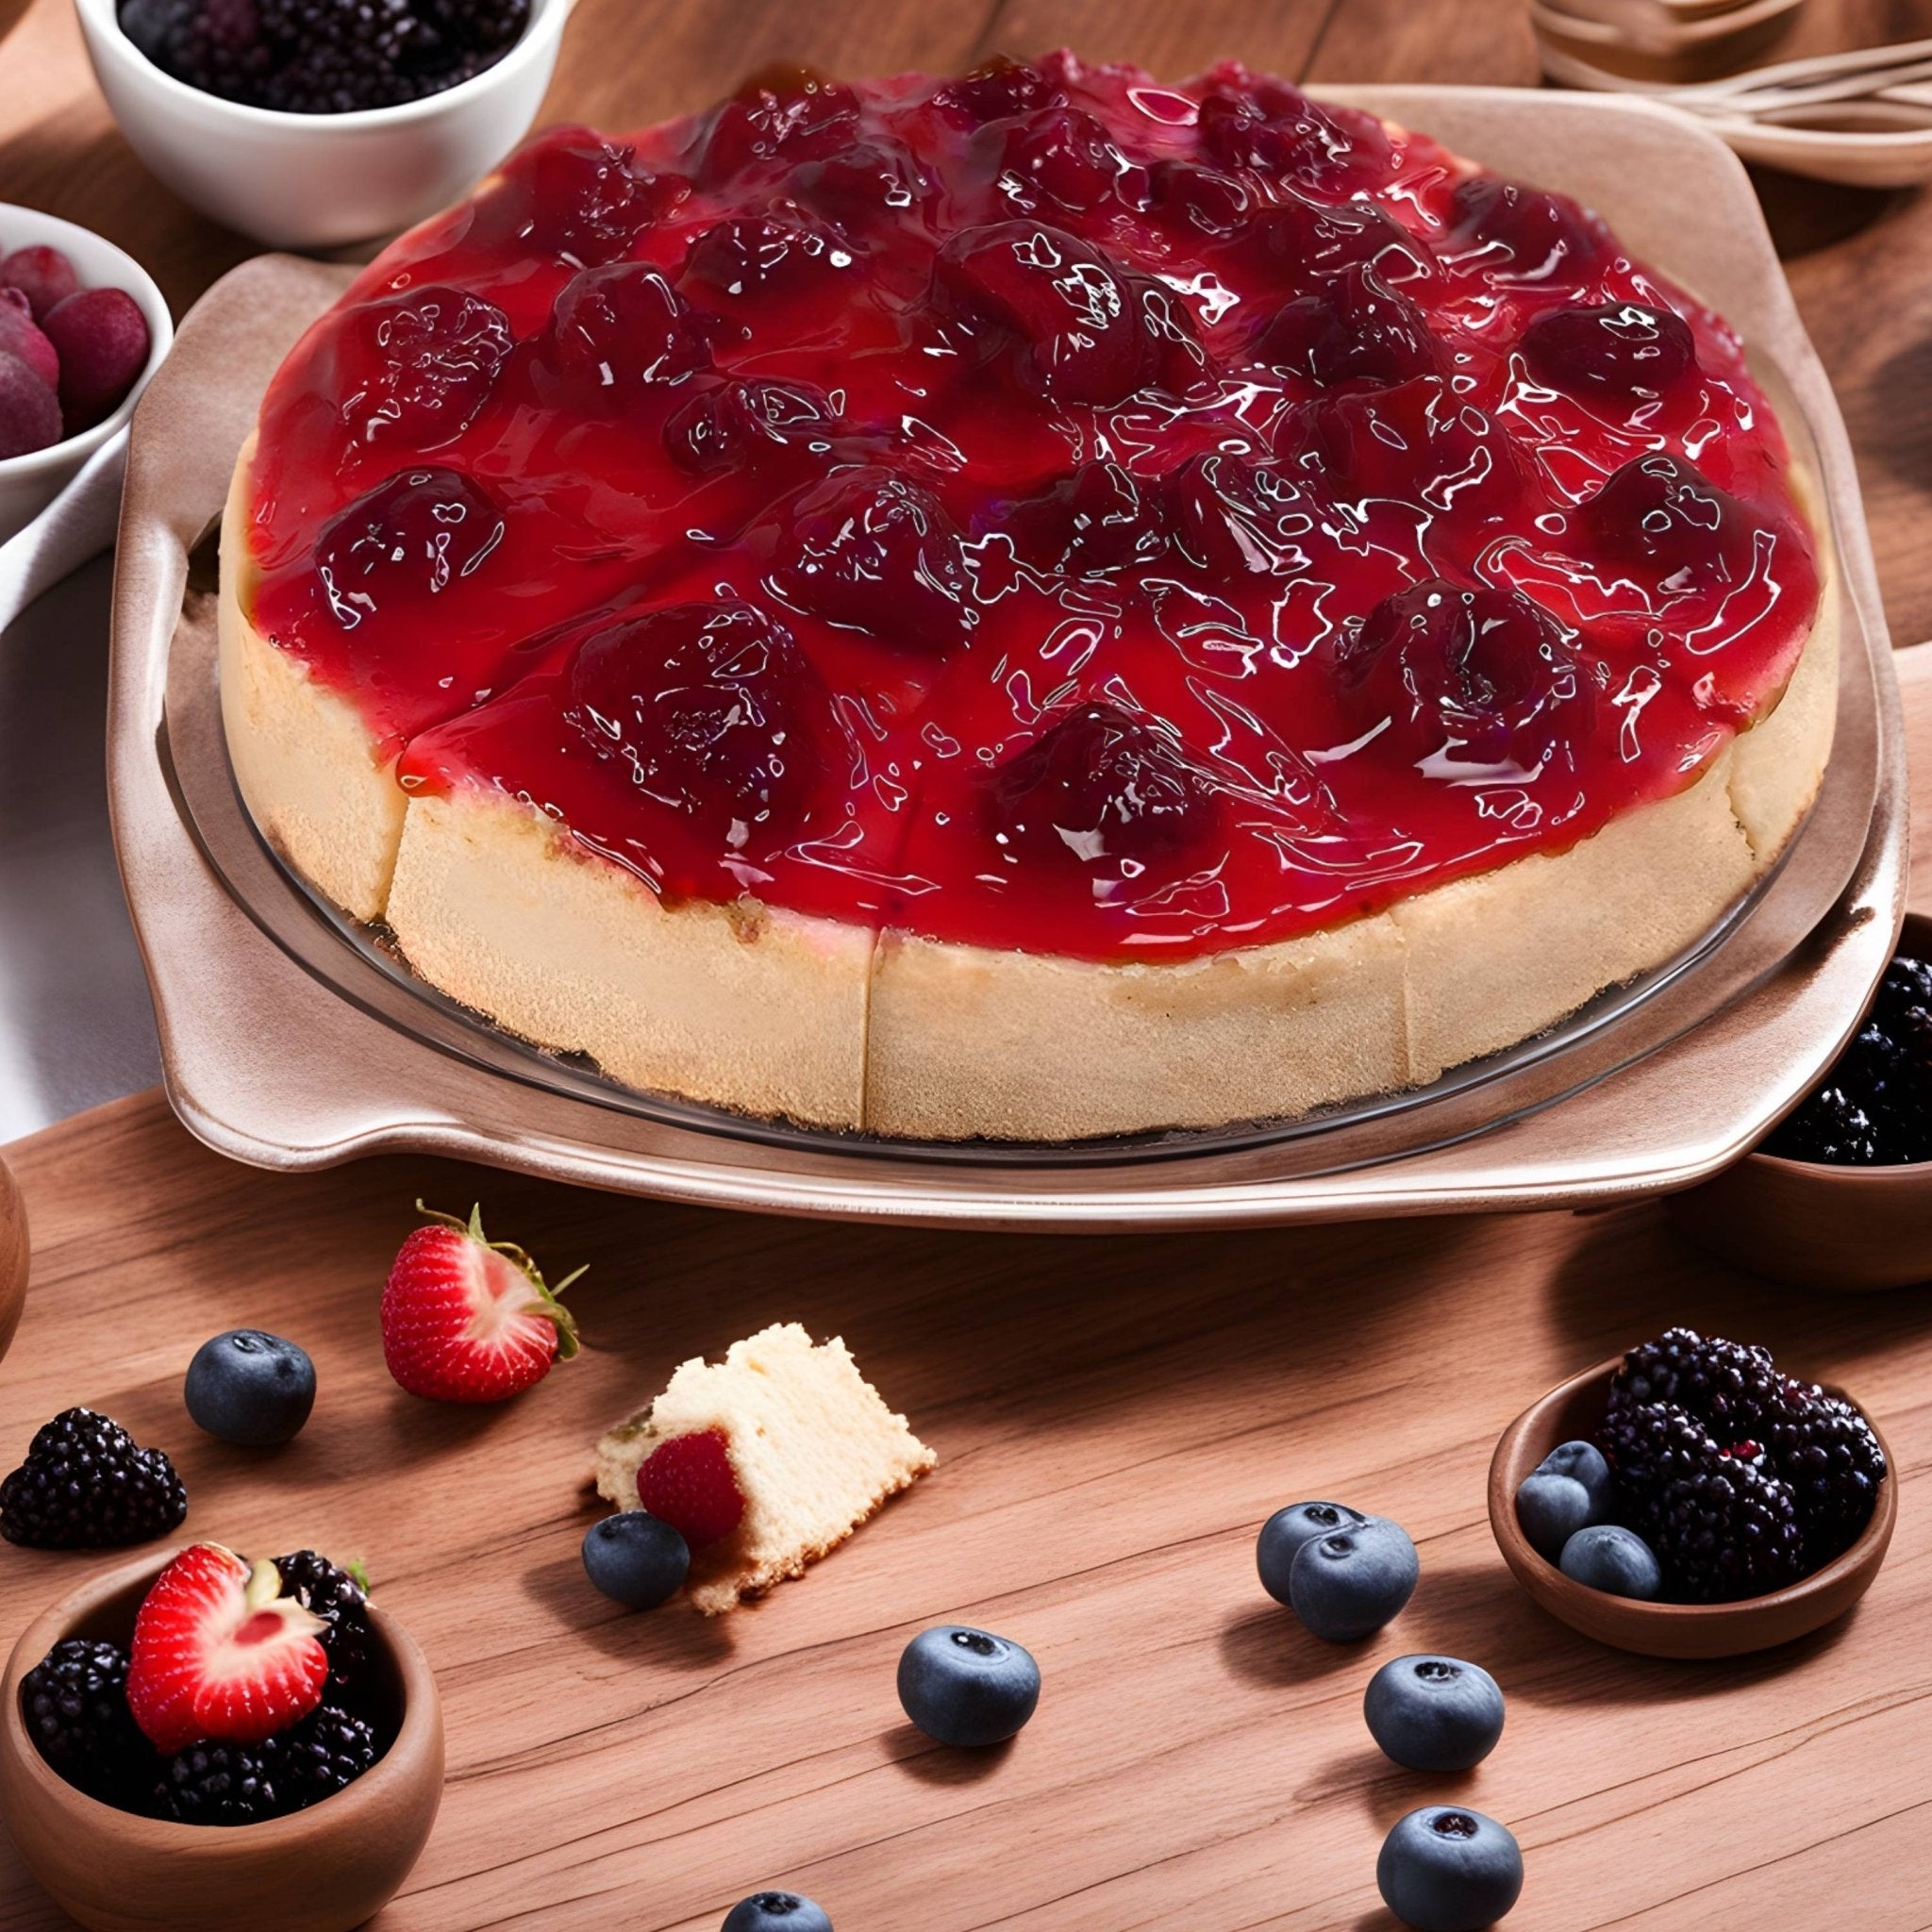 Andy Anand Deliciously Gluten Free & Sugar Free Strawberry Cheesecake 9" - Indulge in Creamy Bliss